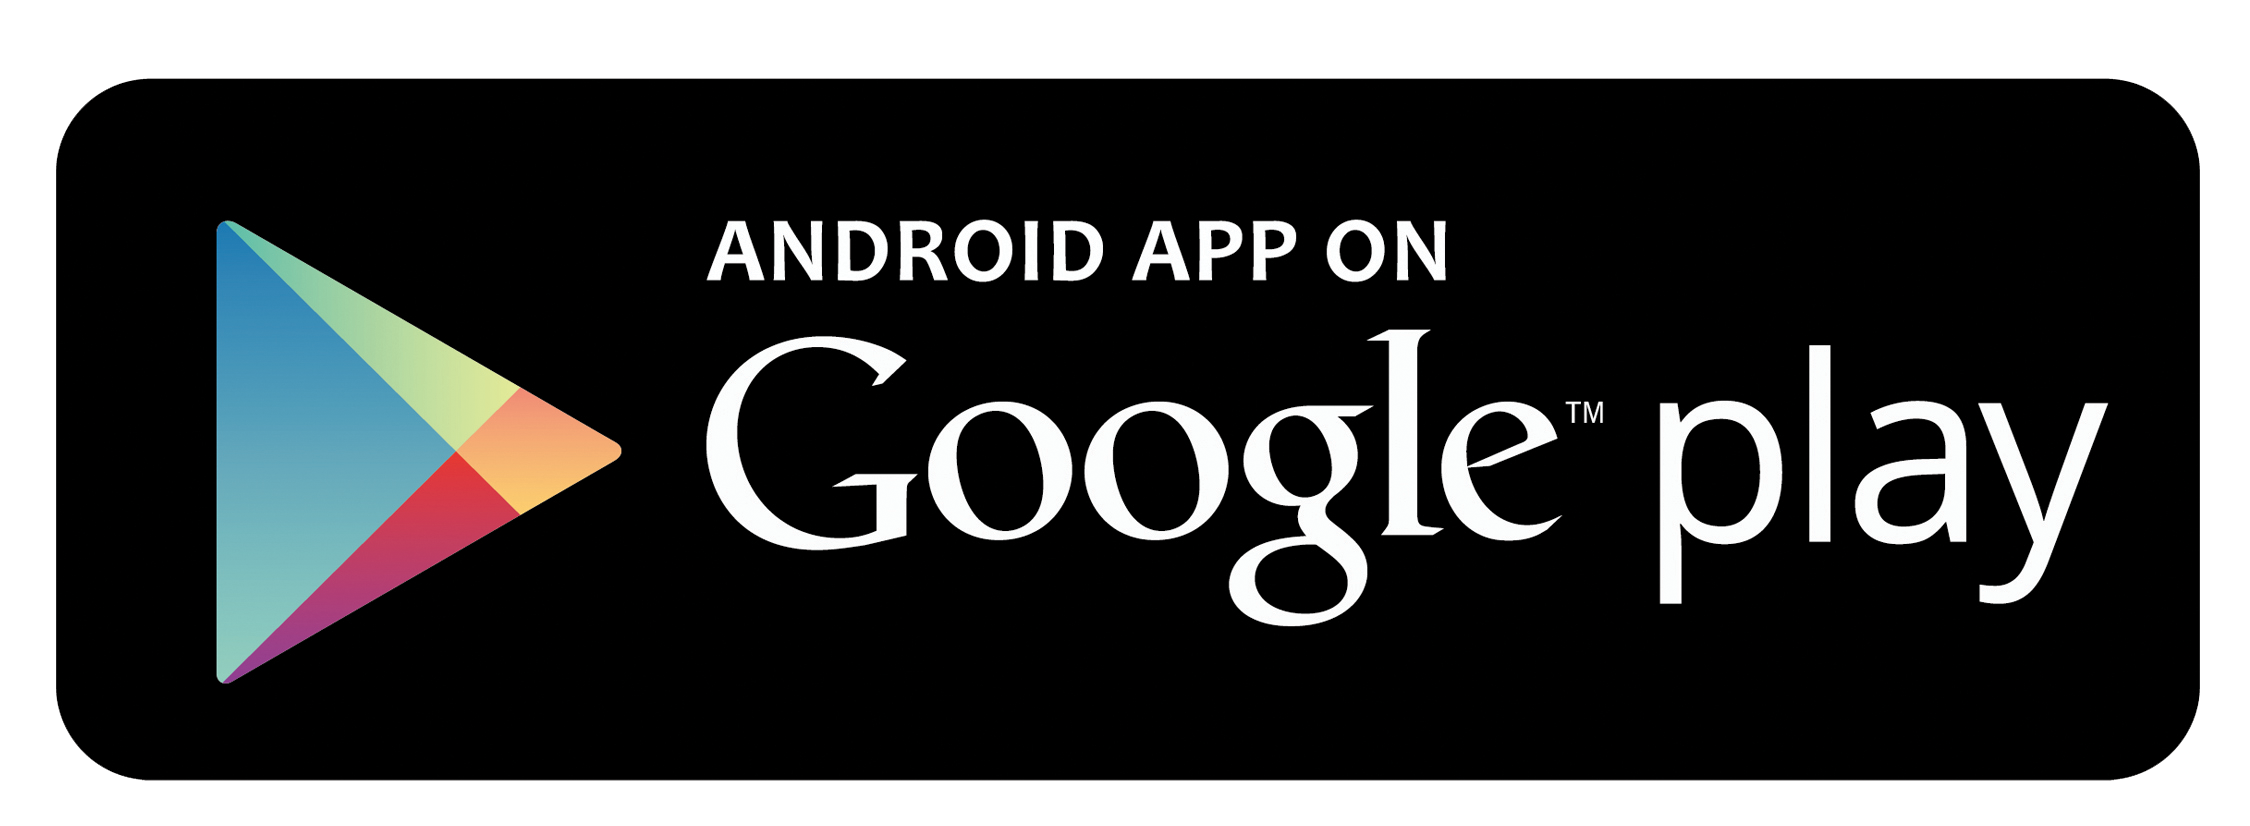 Download Our App On Google Play Store